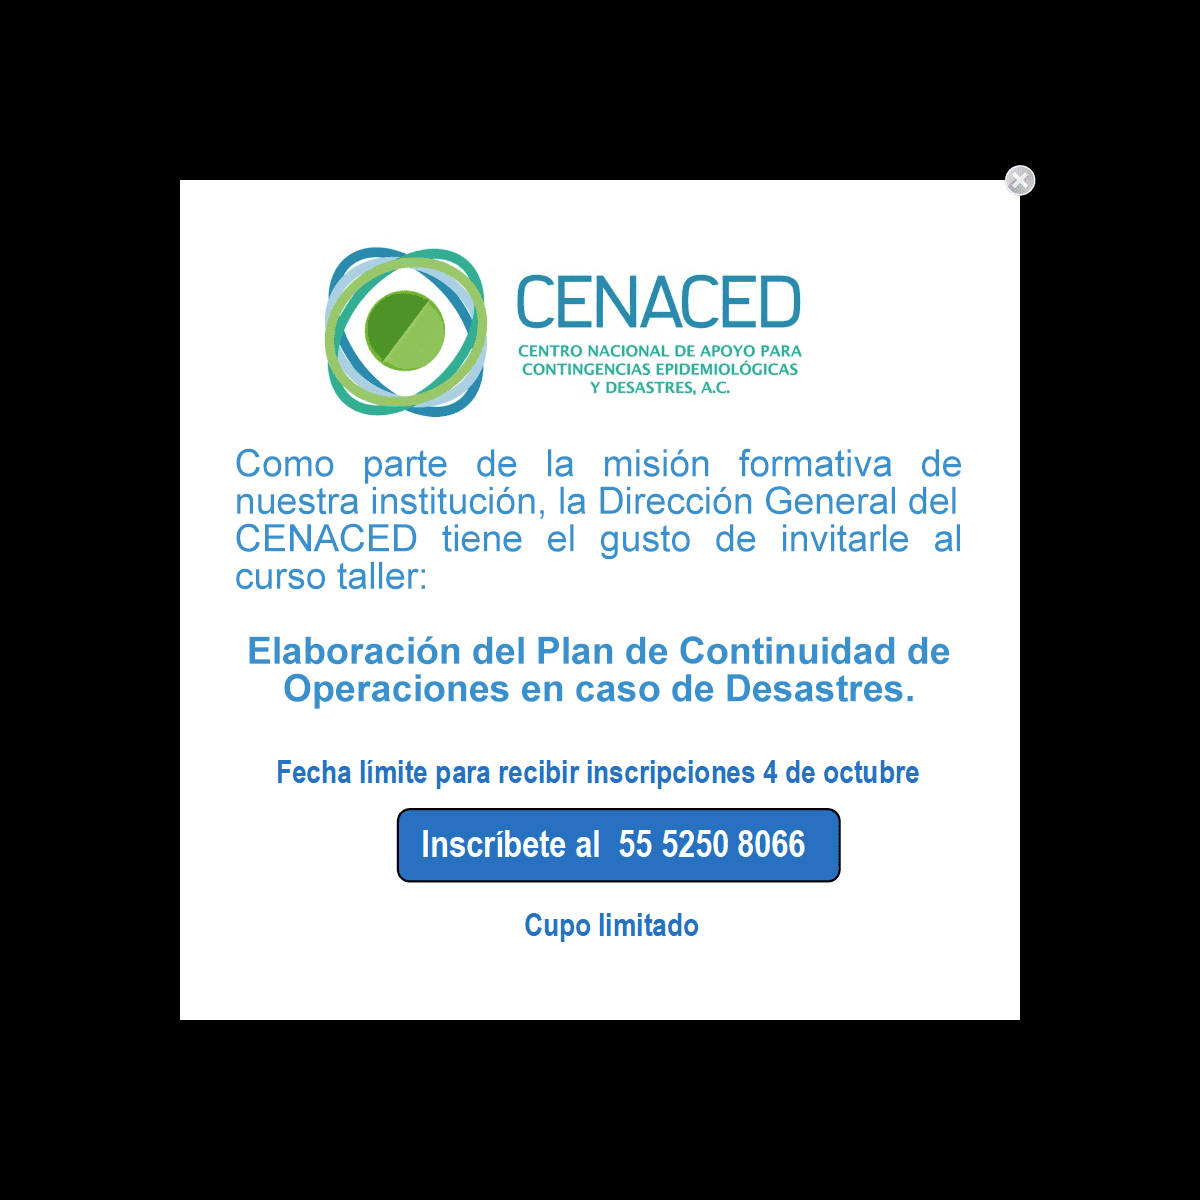 A complete backup of cenaced.org.mx